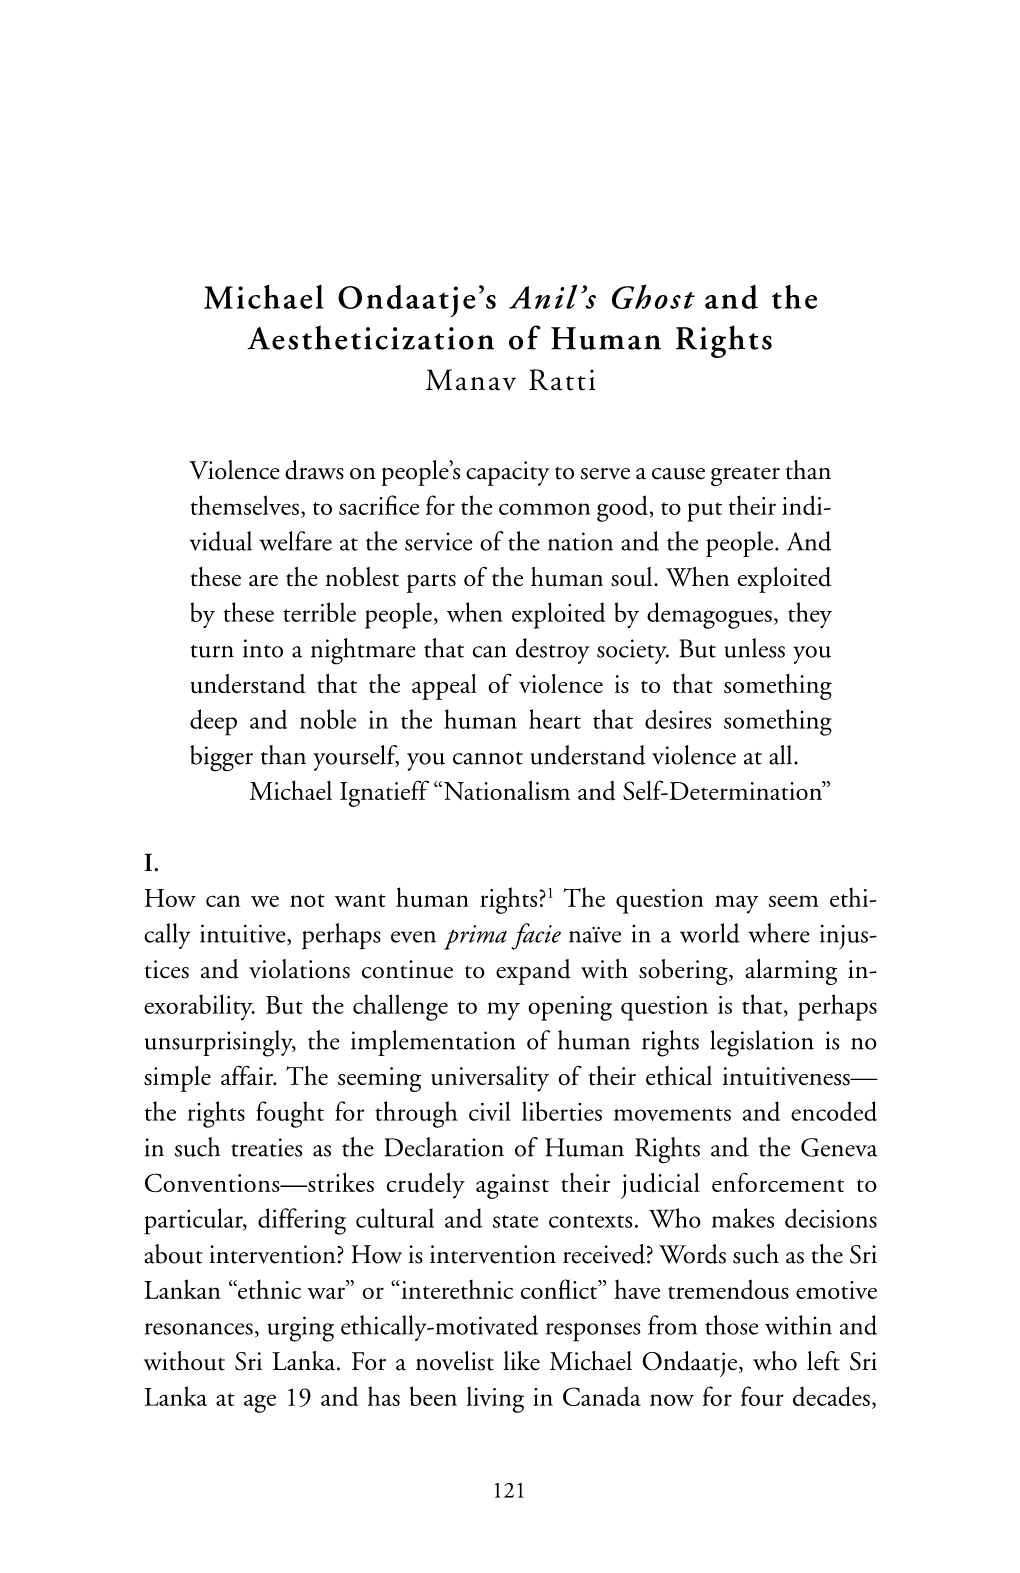 Michael Ondaatje's Anil's Ghost and the Aestheticization of Human Rights